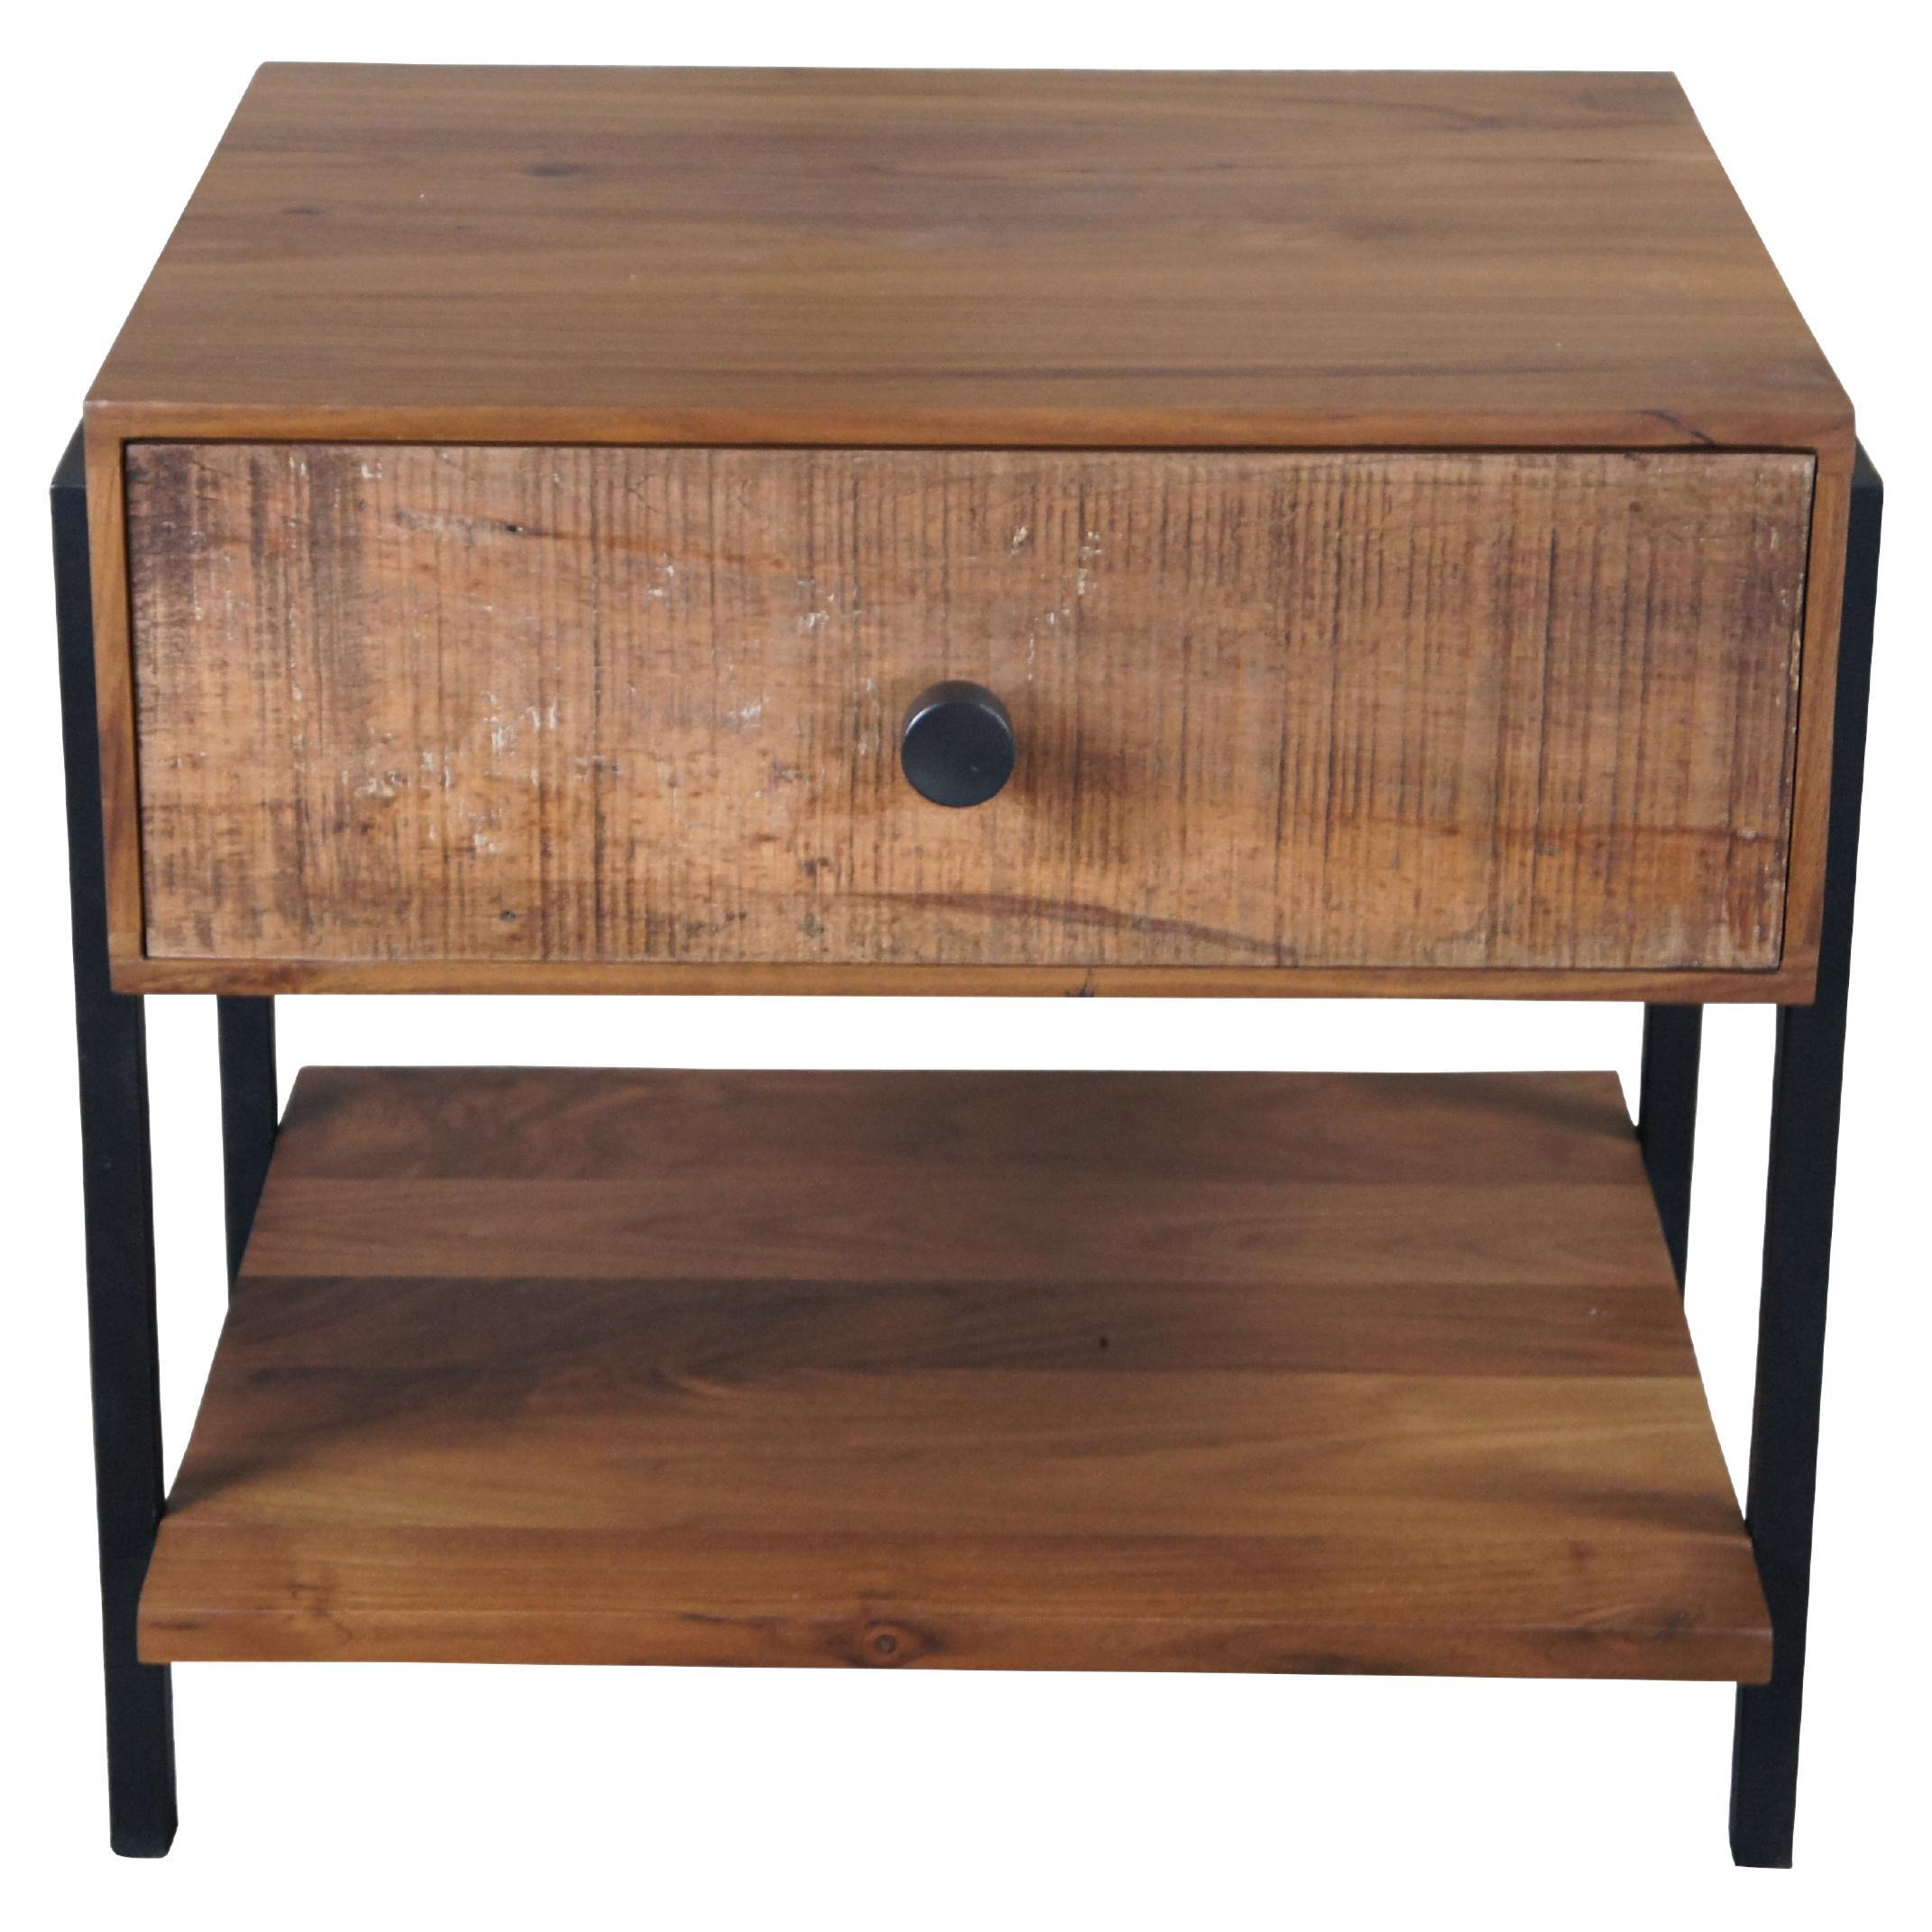 Crate & Barrel Peroba Black Walnut & Steel Atwood Modern Nightstand End Table For Sale